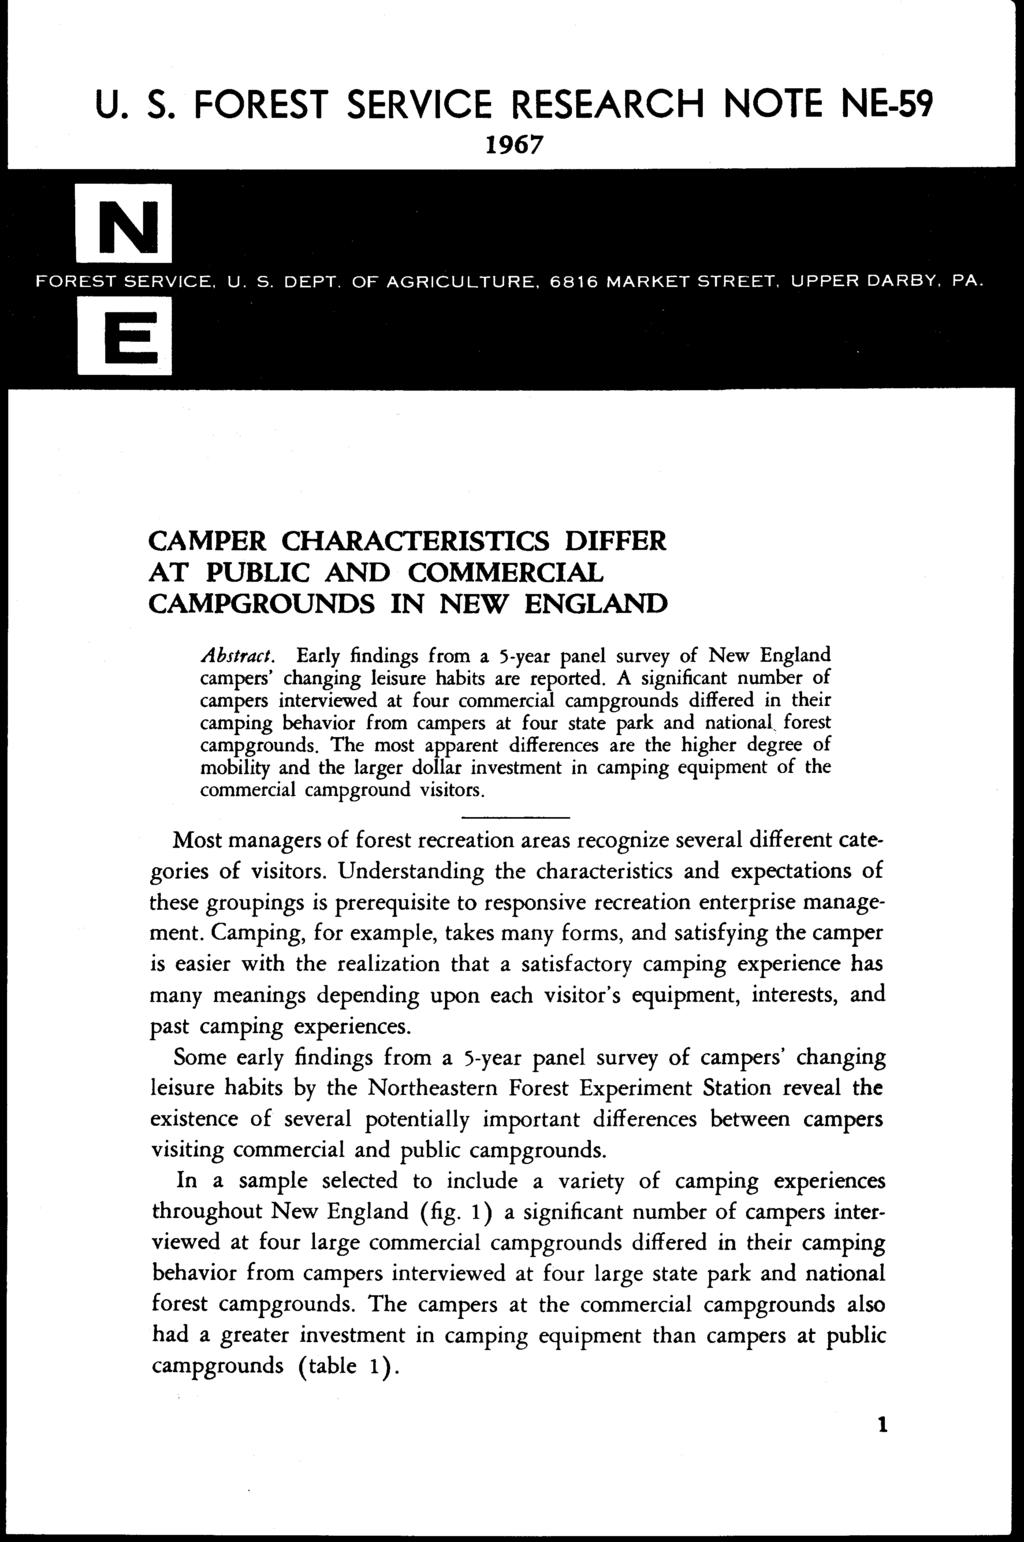 CAMPER CHARACTERISTICS DIFFER AT PUBLIC AND COMMERCIAL CAMPGROUNDS IN NEW ENGLAND Ahact. Early findings from a 5-year panel survey of New England campers' changing leisure habits are reported.